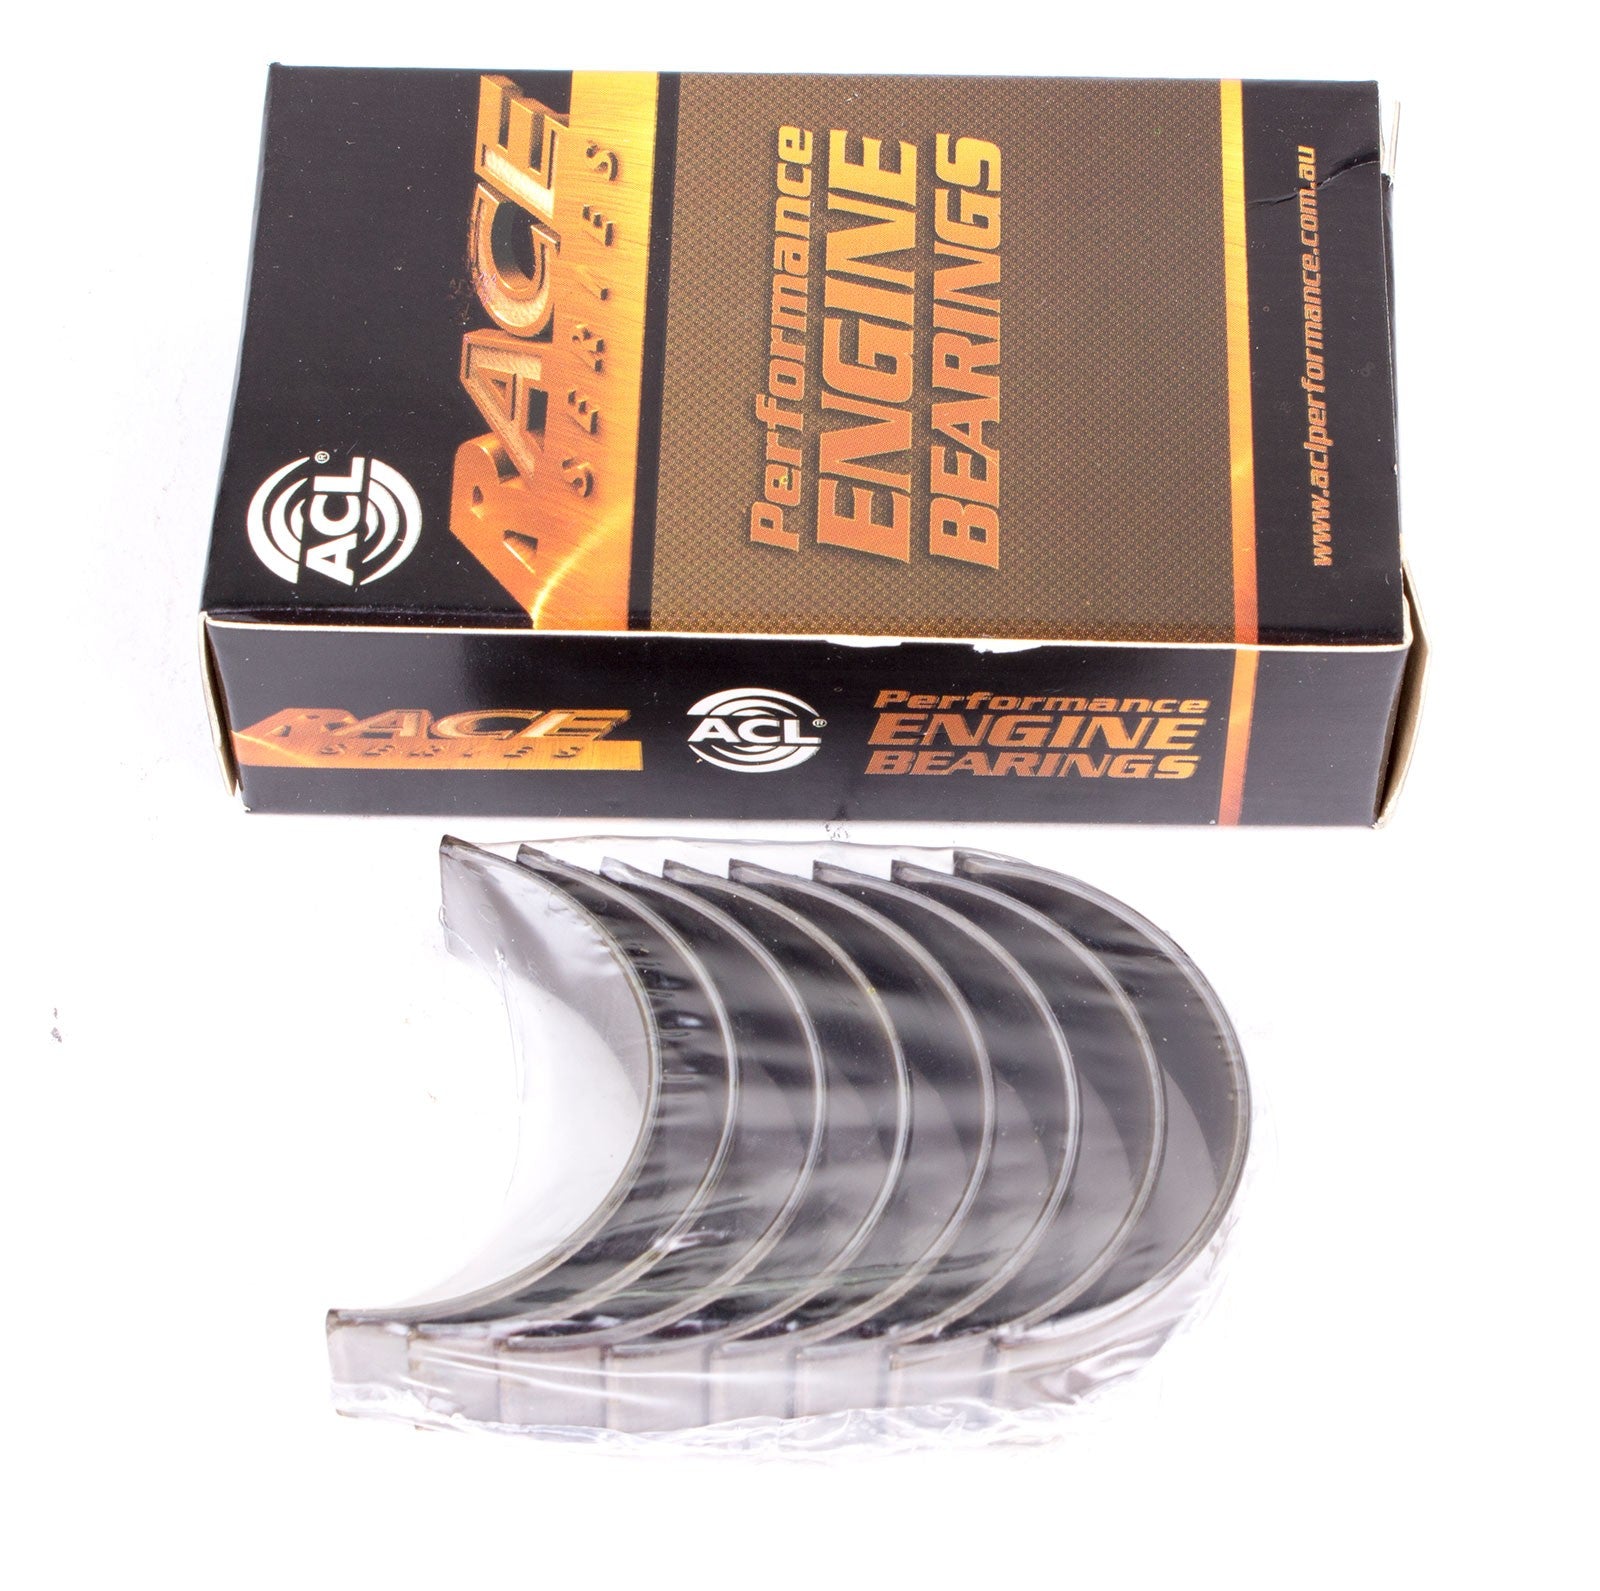 ACL 5M8443H-.025 Main bearing set (ACL Race Series) Photo-0 